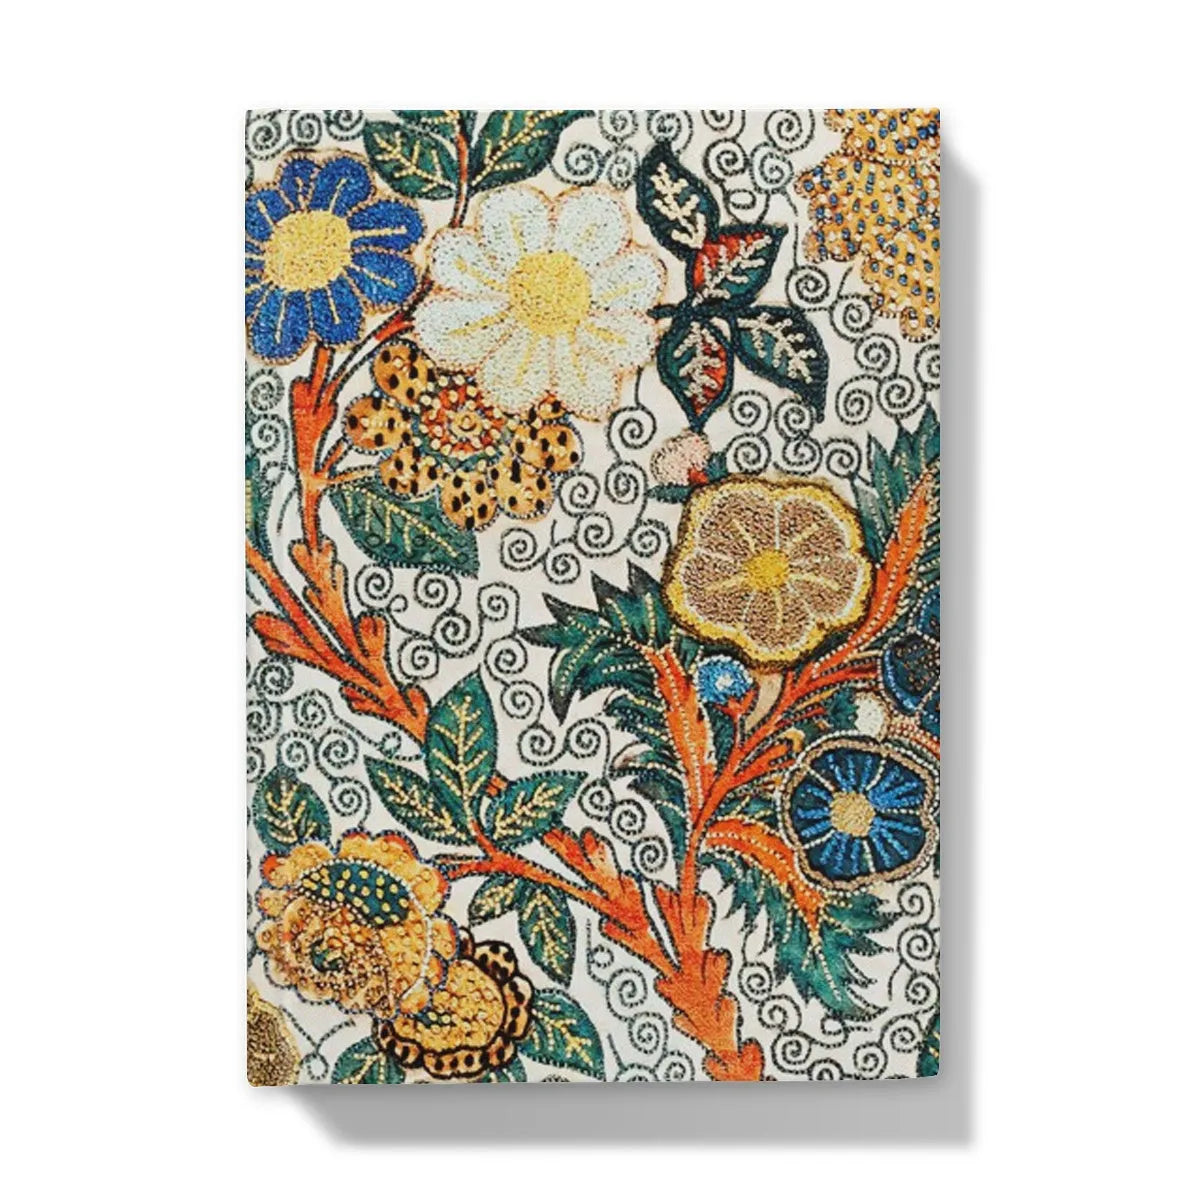 Blossomewhere - Antique Japanese Tapestry Art Journal - 5’x7’ / Lined - Notebooks & Notepads - Aesthetic Art